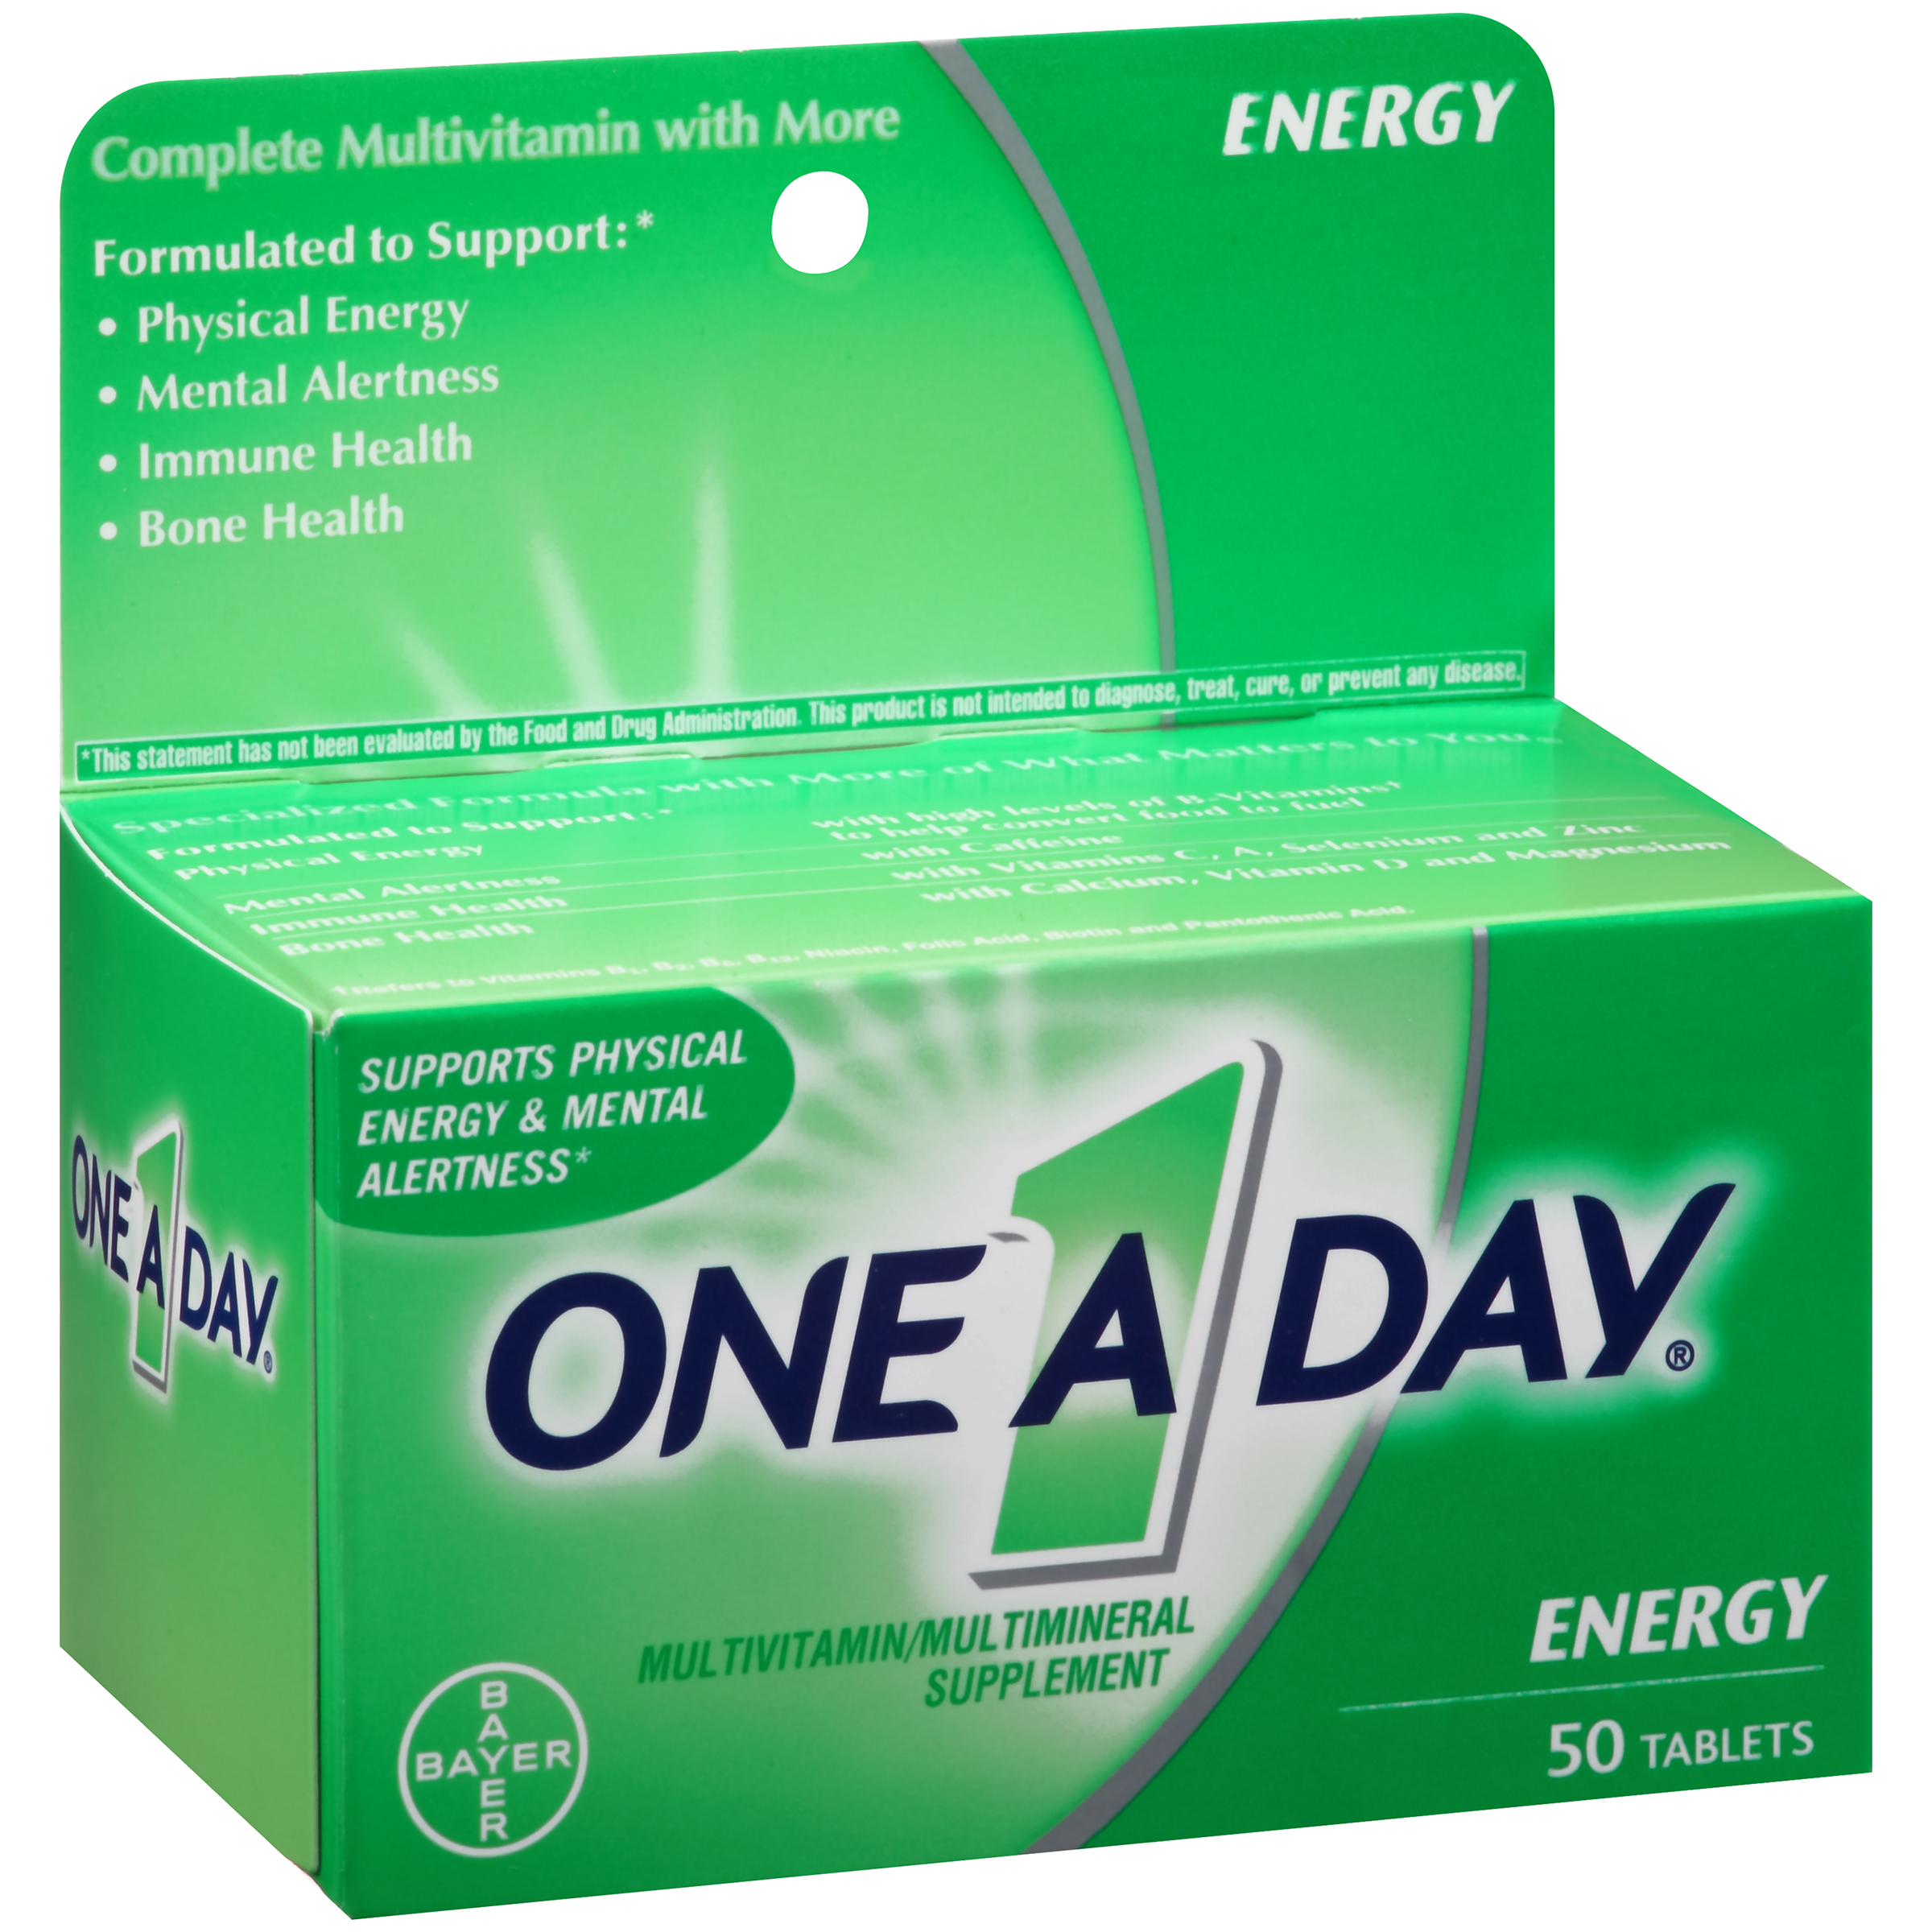 One A Day Energy, Multivitamin Supplement including Caffeine, Vitamins A, C, E, B1, B2, B6, B12, Calcium and Vitamin D, 50 ct. - image 3 of 5